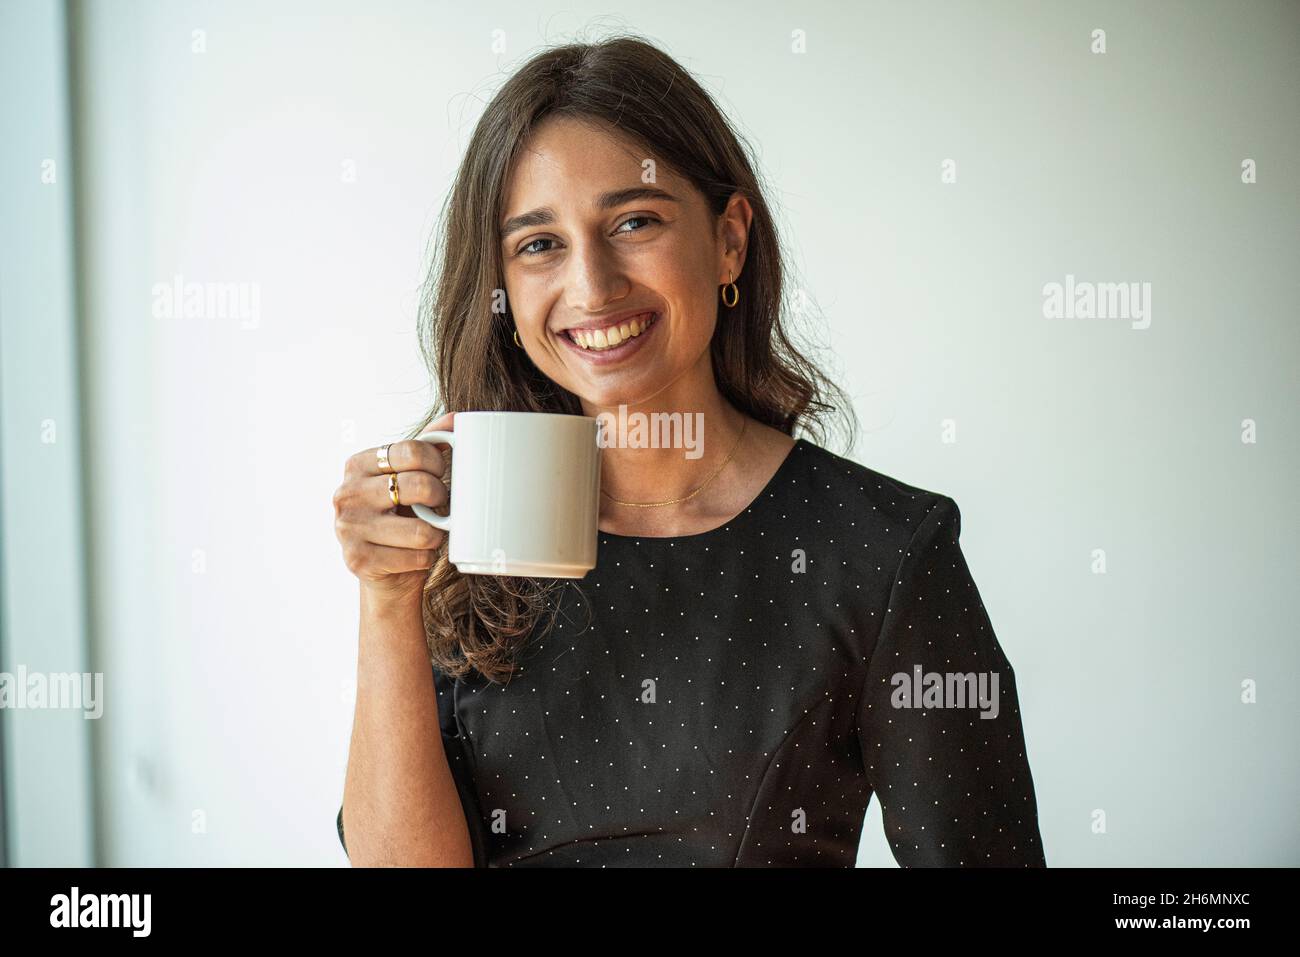 Portrait of smiling young woman holding a coffee cup Stock Photo